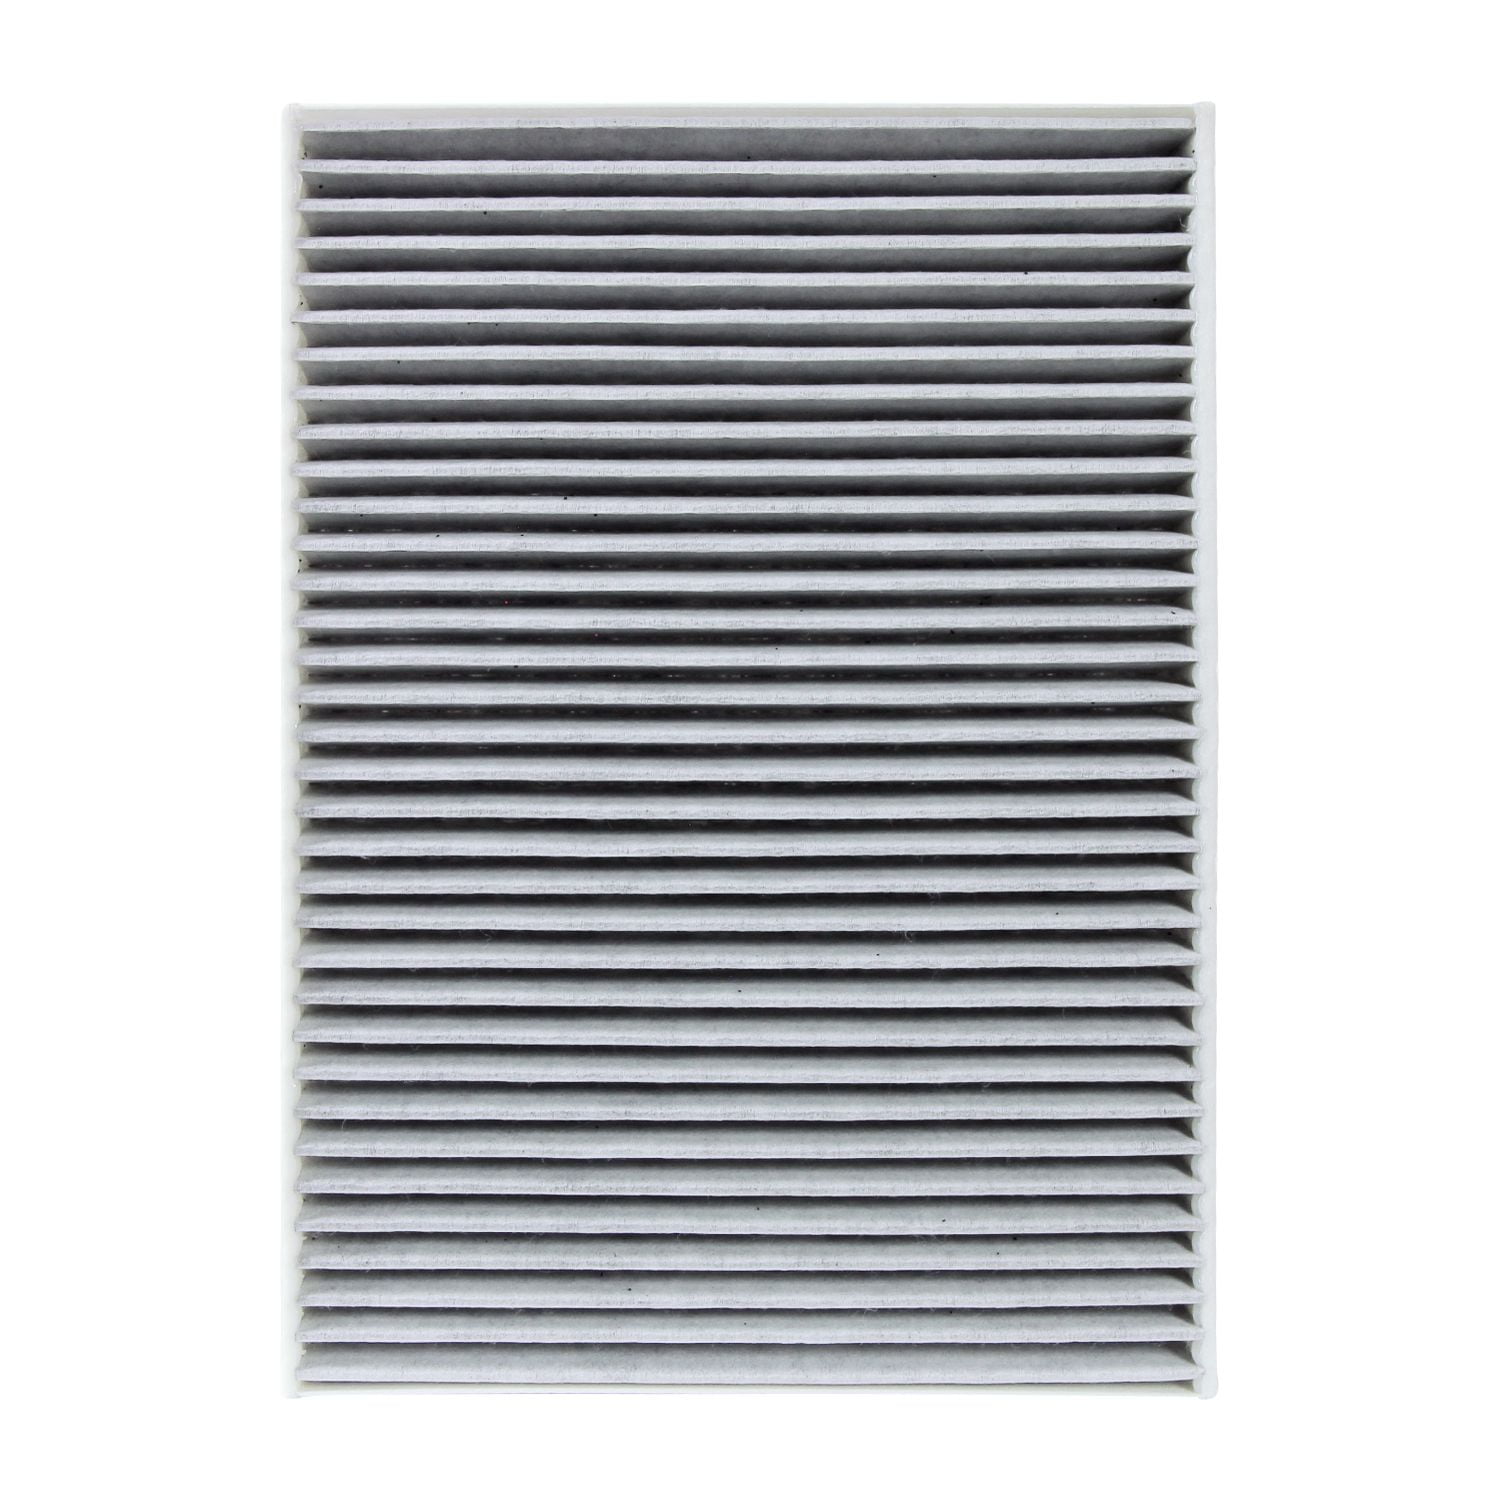 Replacement TYC 800207C Cabin Air Filter For 2017 Audi Q7 4M0819439A - Walmart.com 2017 Audi Q7 Engine Air Filter Replacement